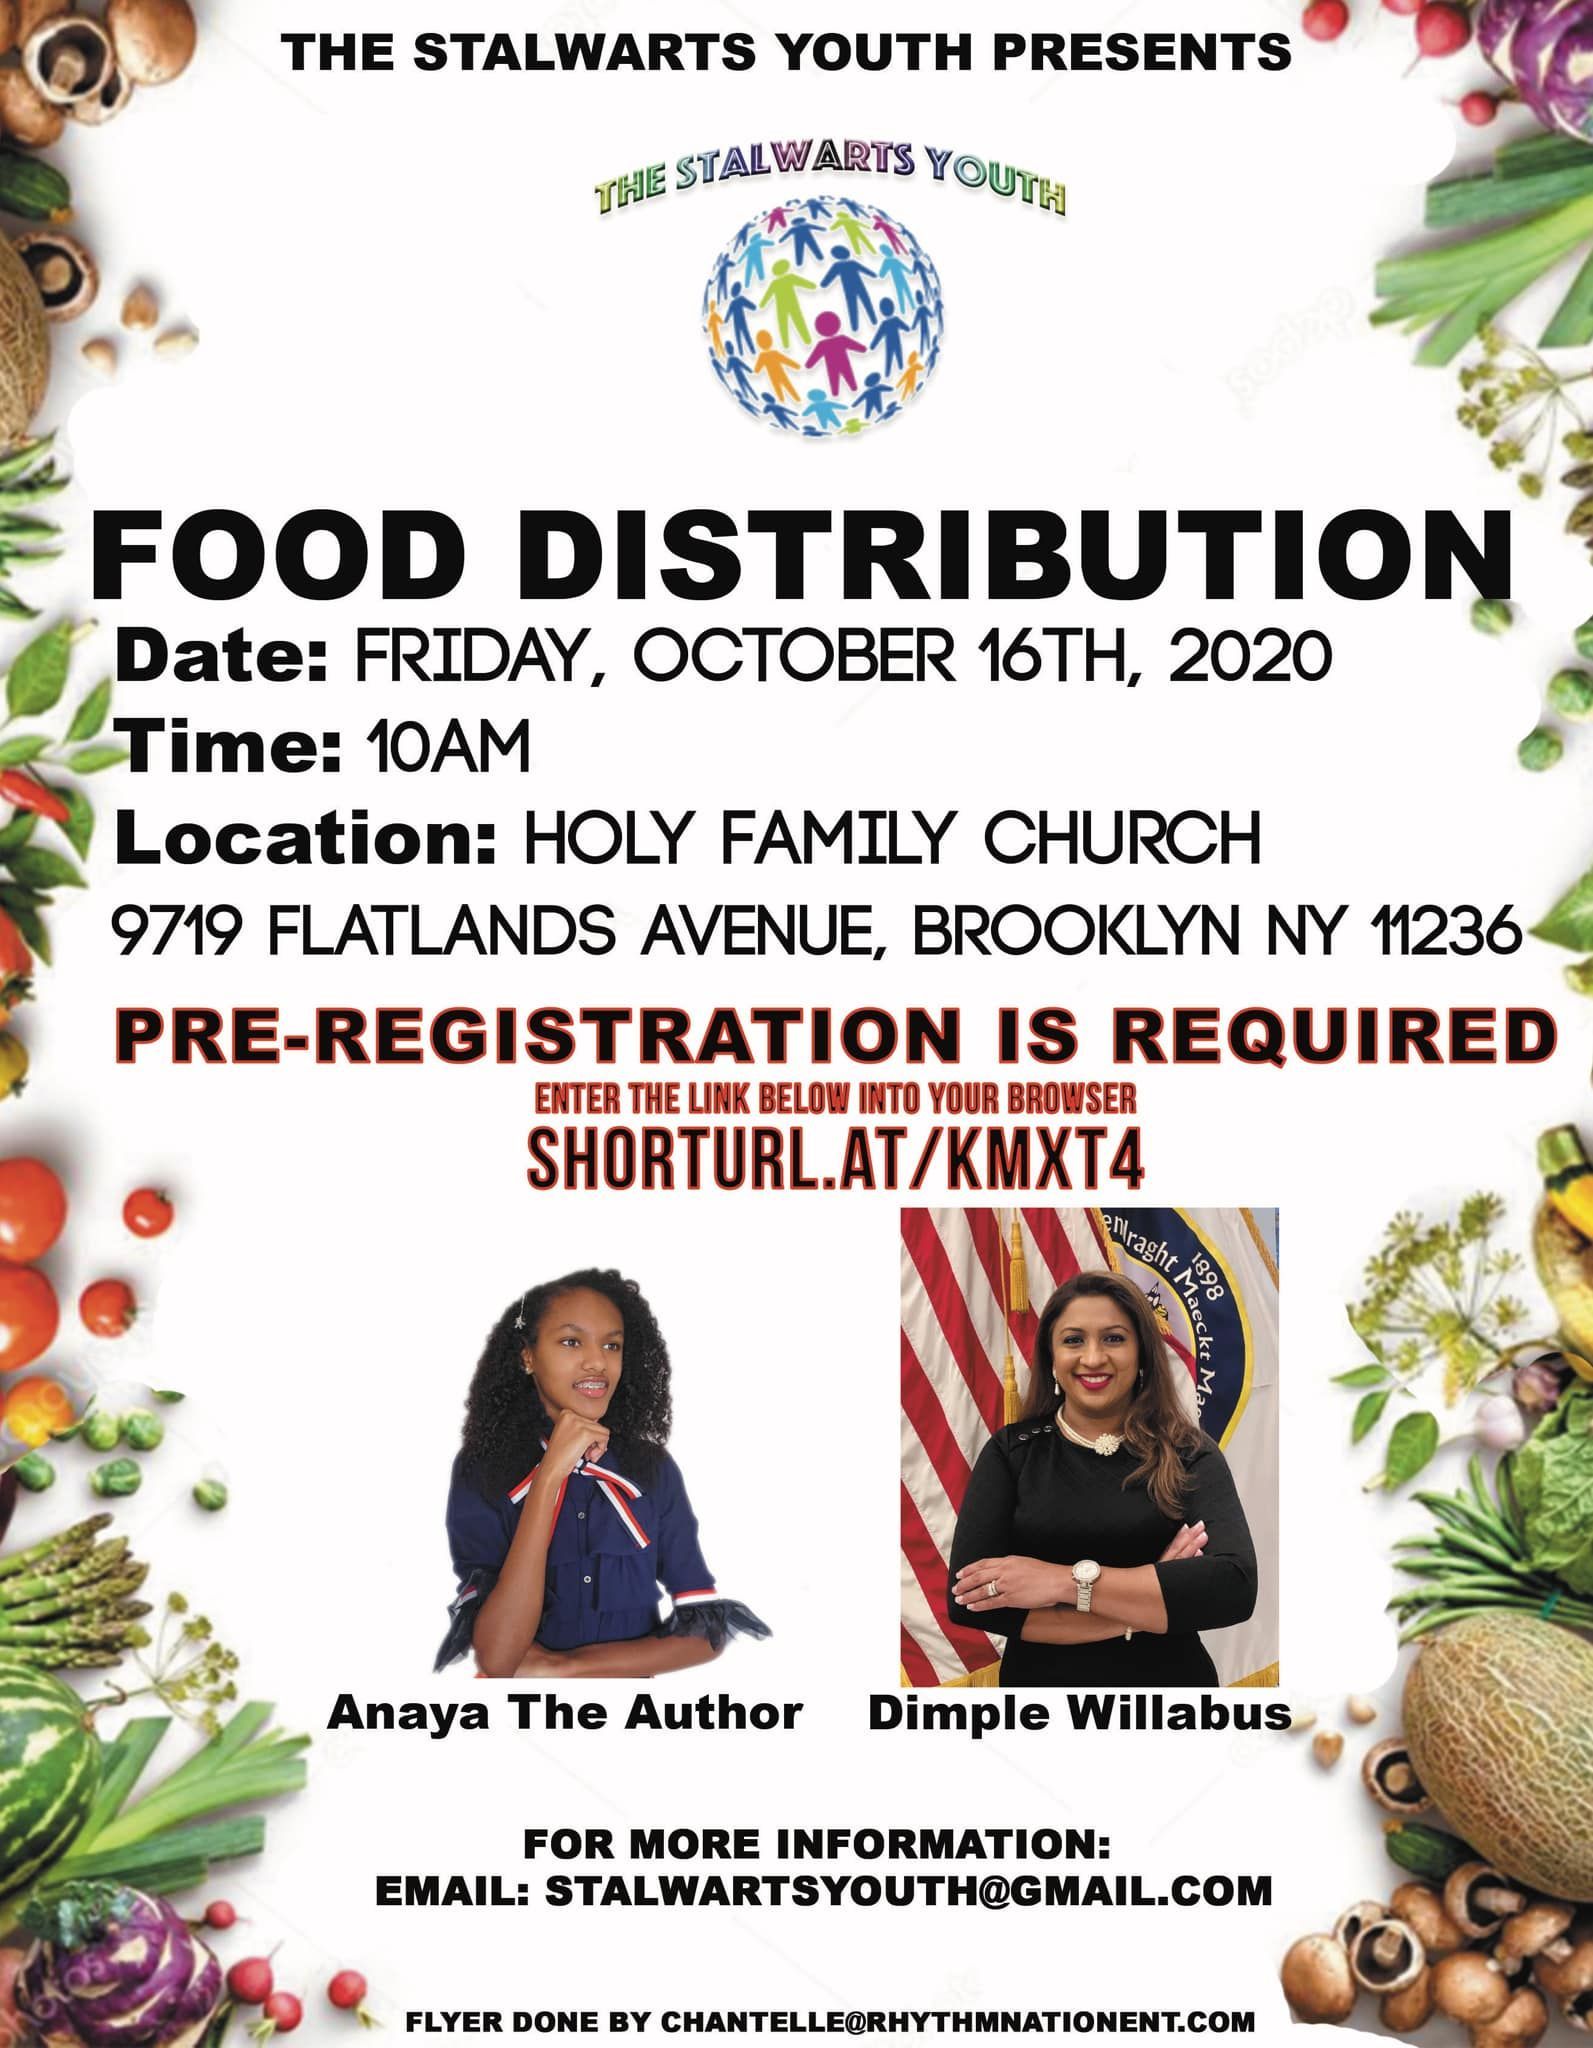 Stalwarts Youth Food Distribution at Holy Family Church in Brooklyn, NY on October 16, 2020